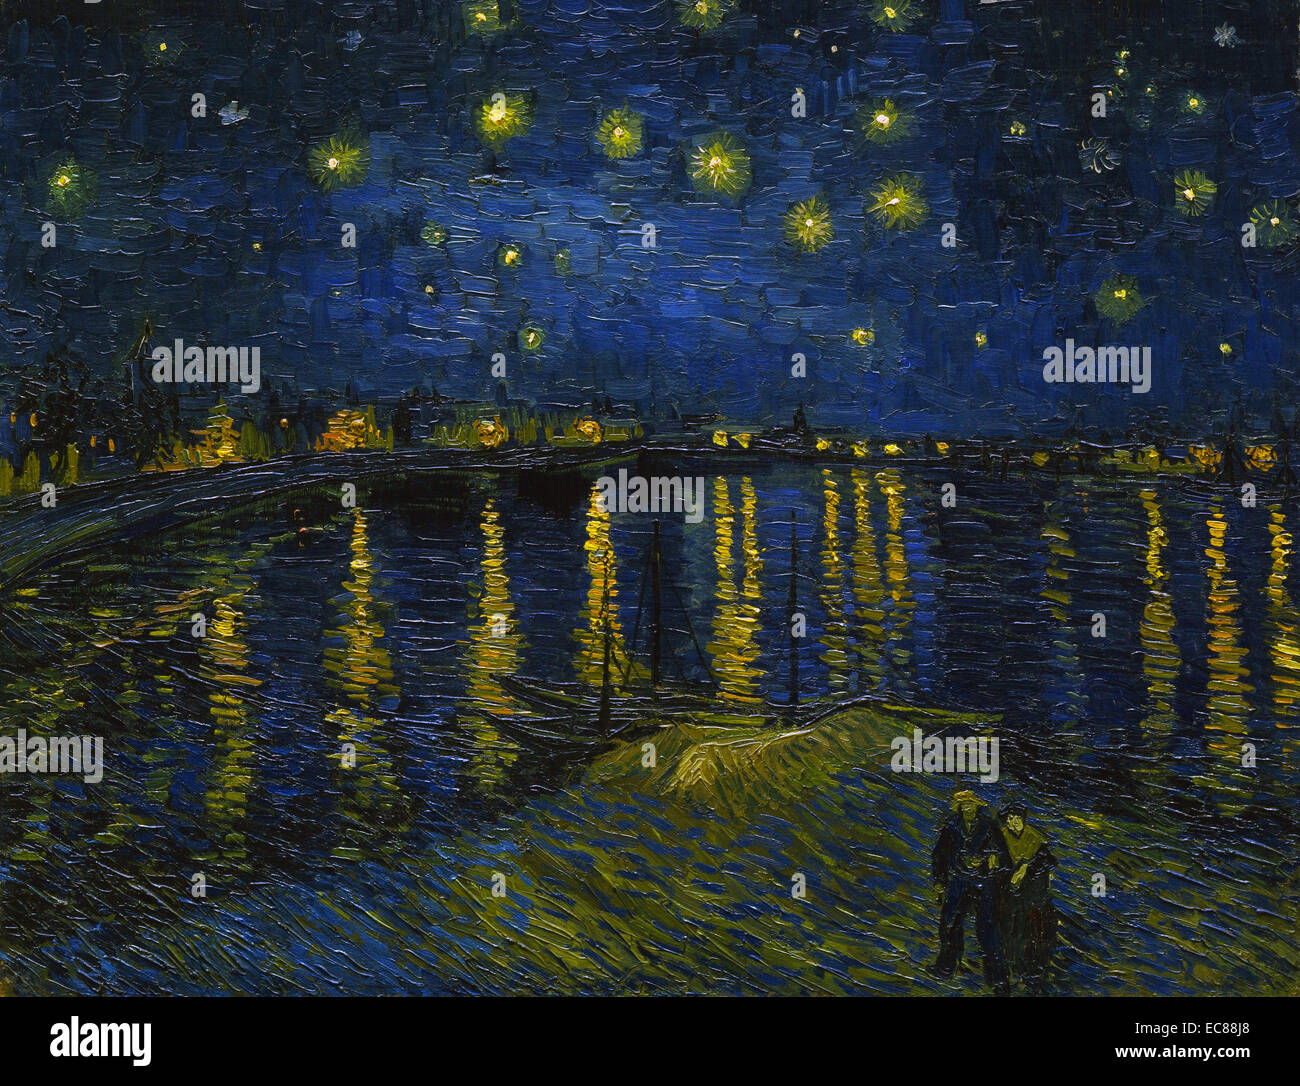 Painting titled 'Starry Night over the Rhône' by Vincent van Gogh (1853-1890) Dutch painter. Dated 1888 Stock Photo